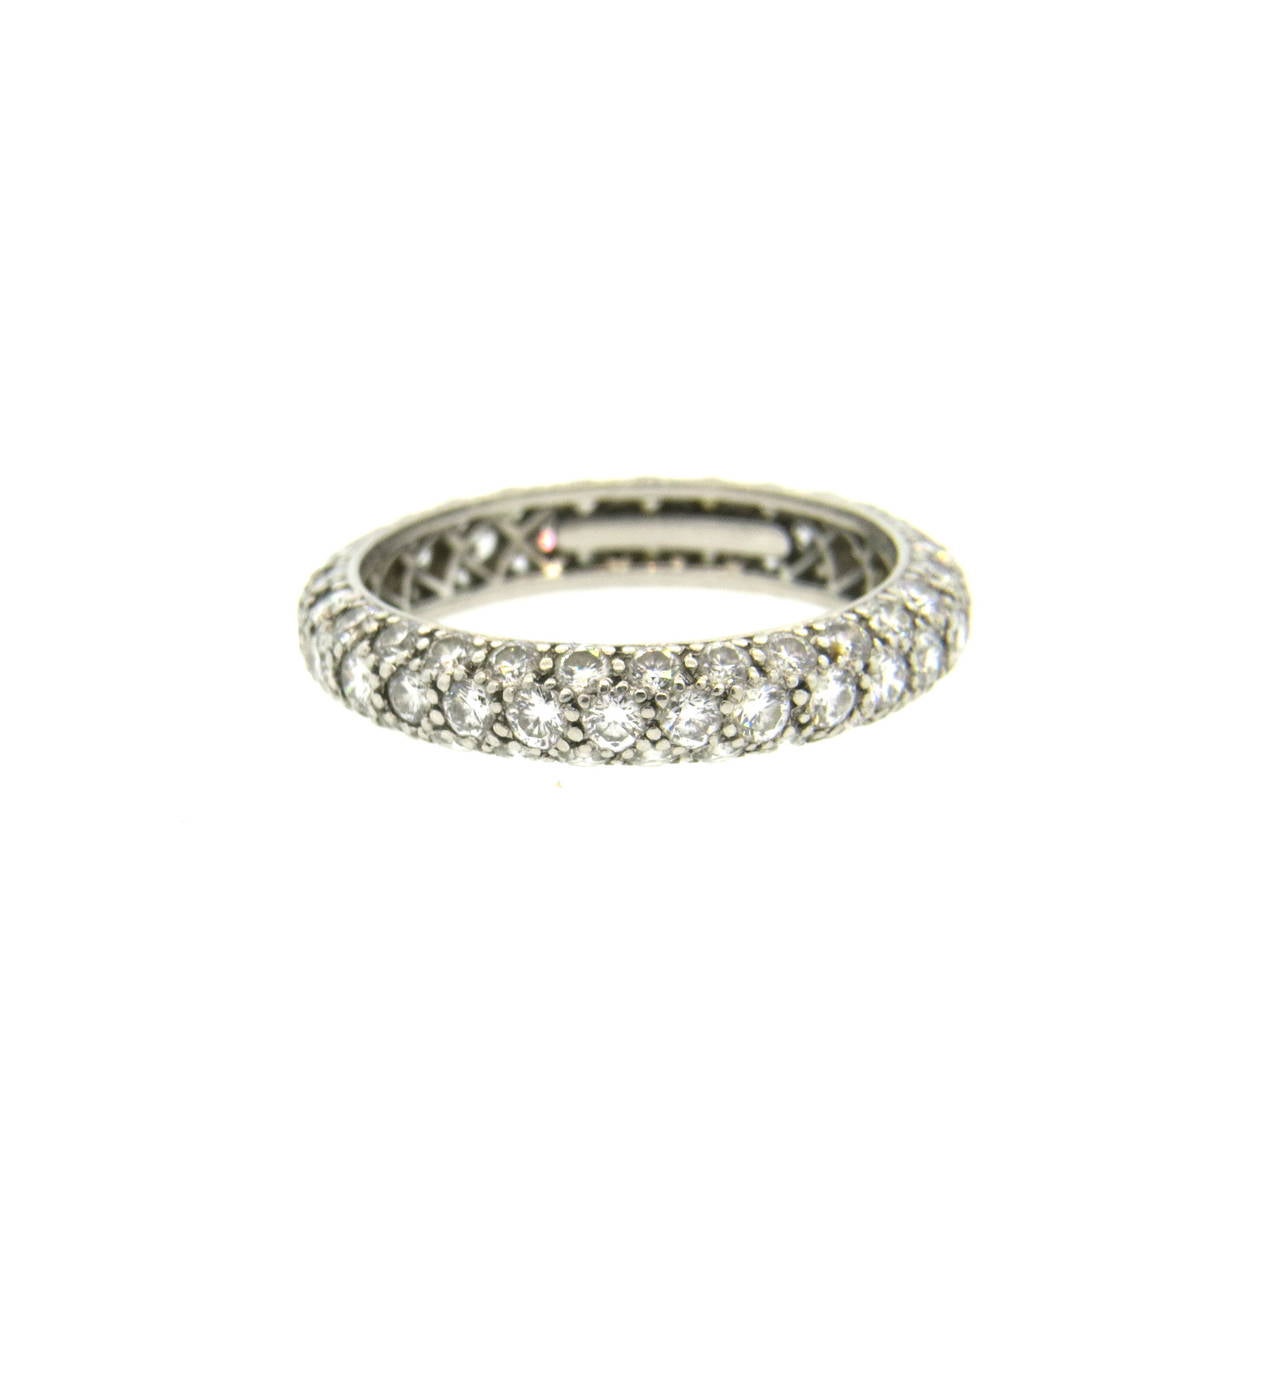 Stunning platinum eternity diamond ring from the Etoile collection from Tiffany & Co. Diamonds total approximately 1.80ctw. Ring size 6, band measures     3.8mm wide. Marked Tiffany & Co. PT950. Weighs 3.3 grams. 
Currently retails for $9,400